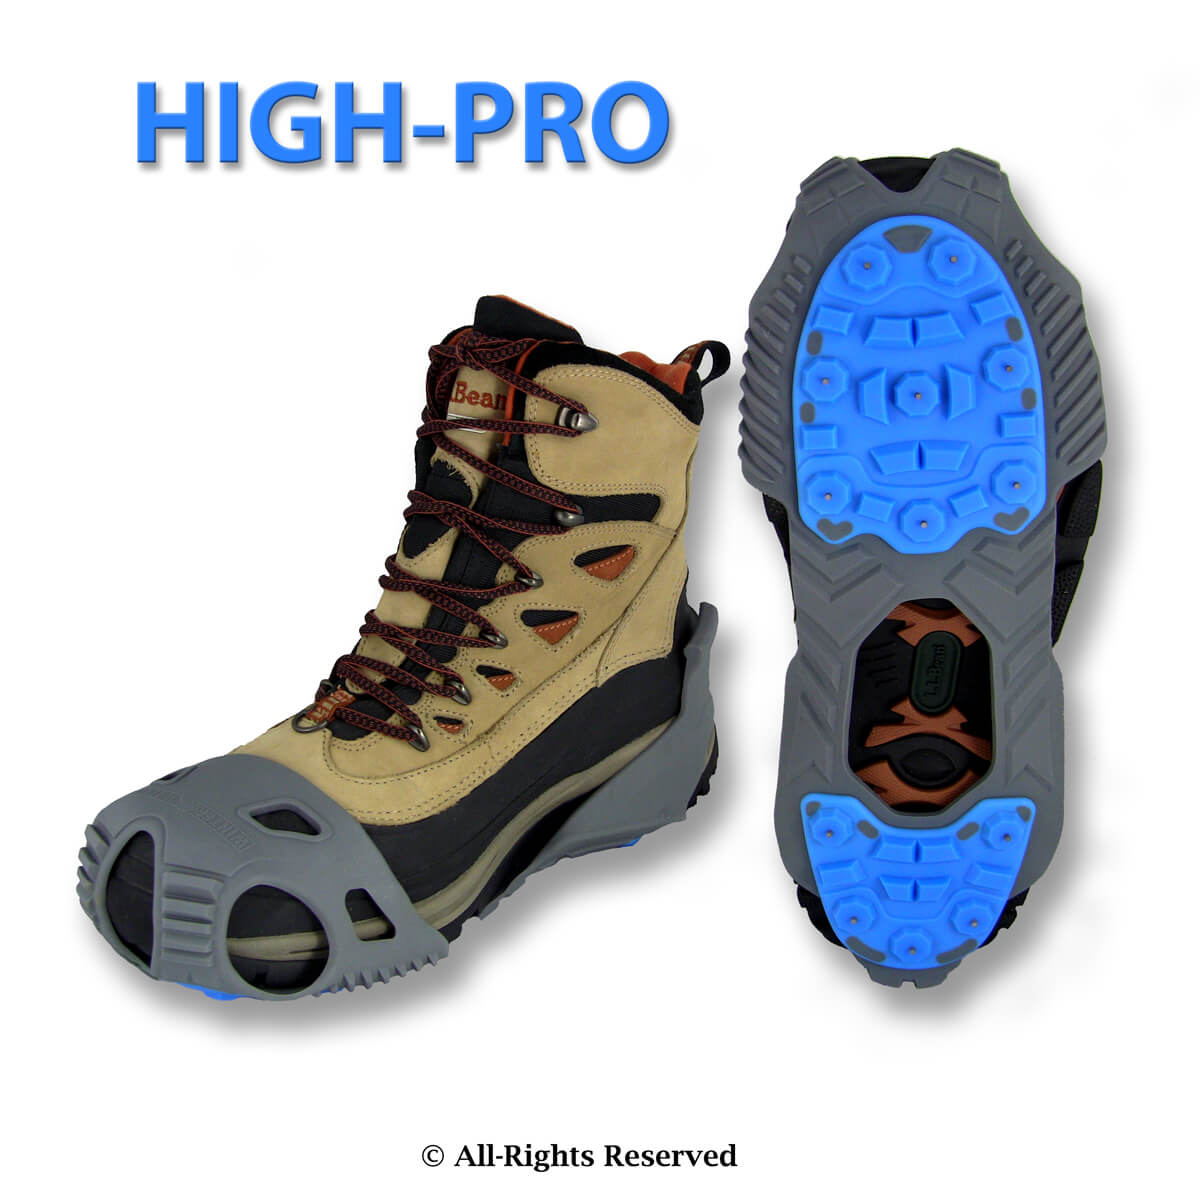 Winter Walking HIGH-PRO Ice Cleats for Boots